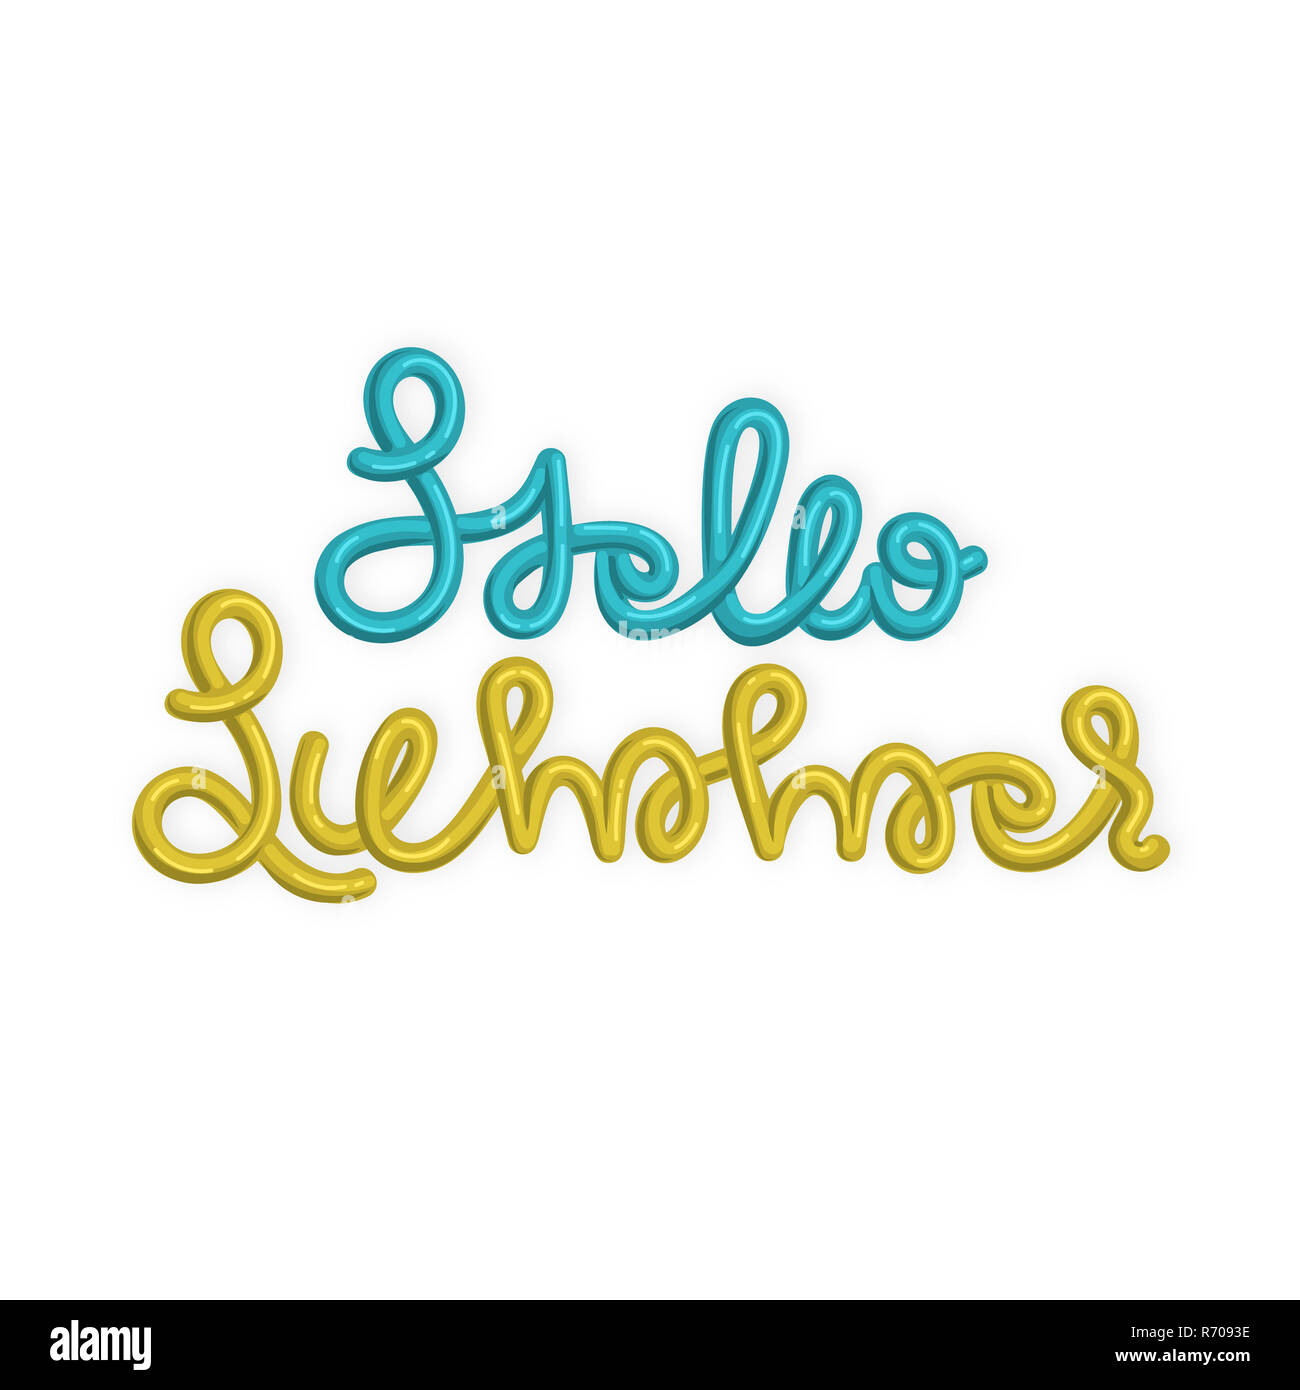 Hello summer. Creative hand drawn lettering in form of long balloons. Summertime. Season of rest and travel. Beach party. It can be used for poster, banner, card, invitation, sale Stock Photo